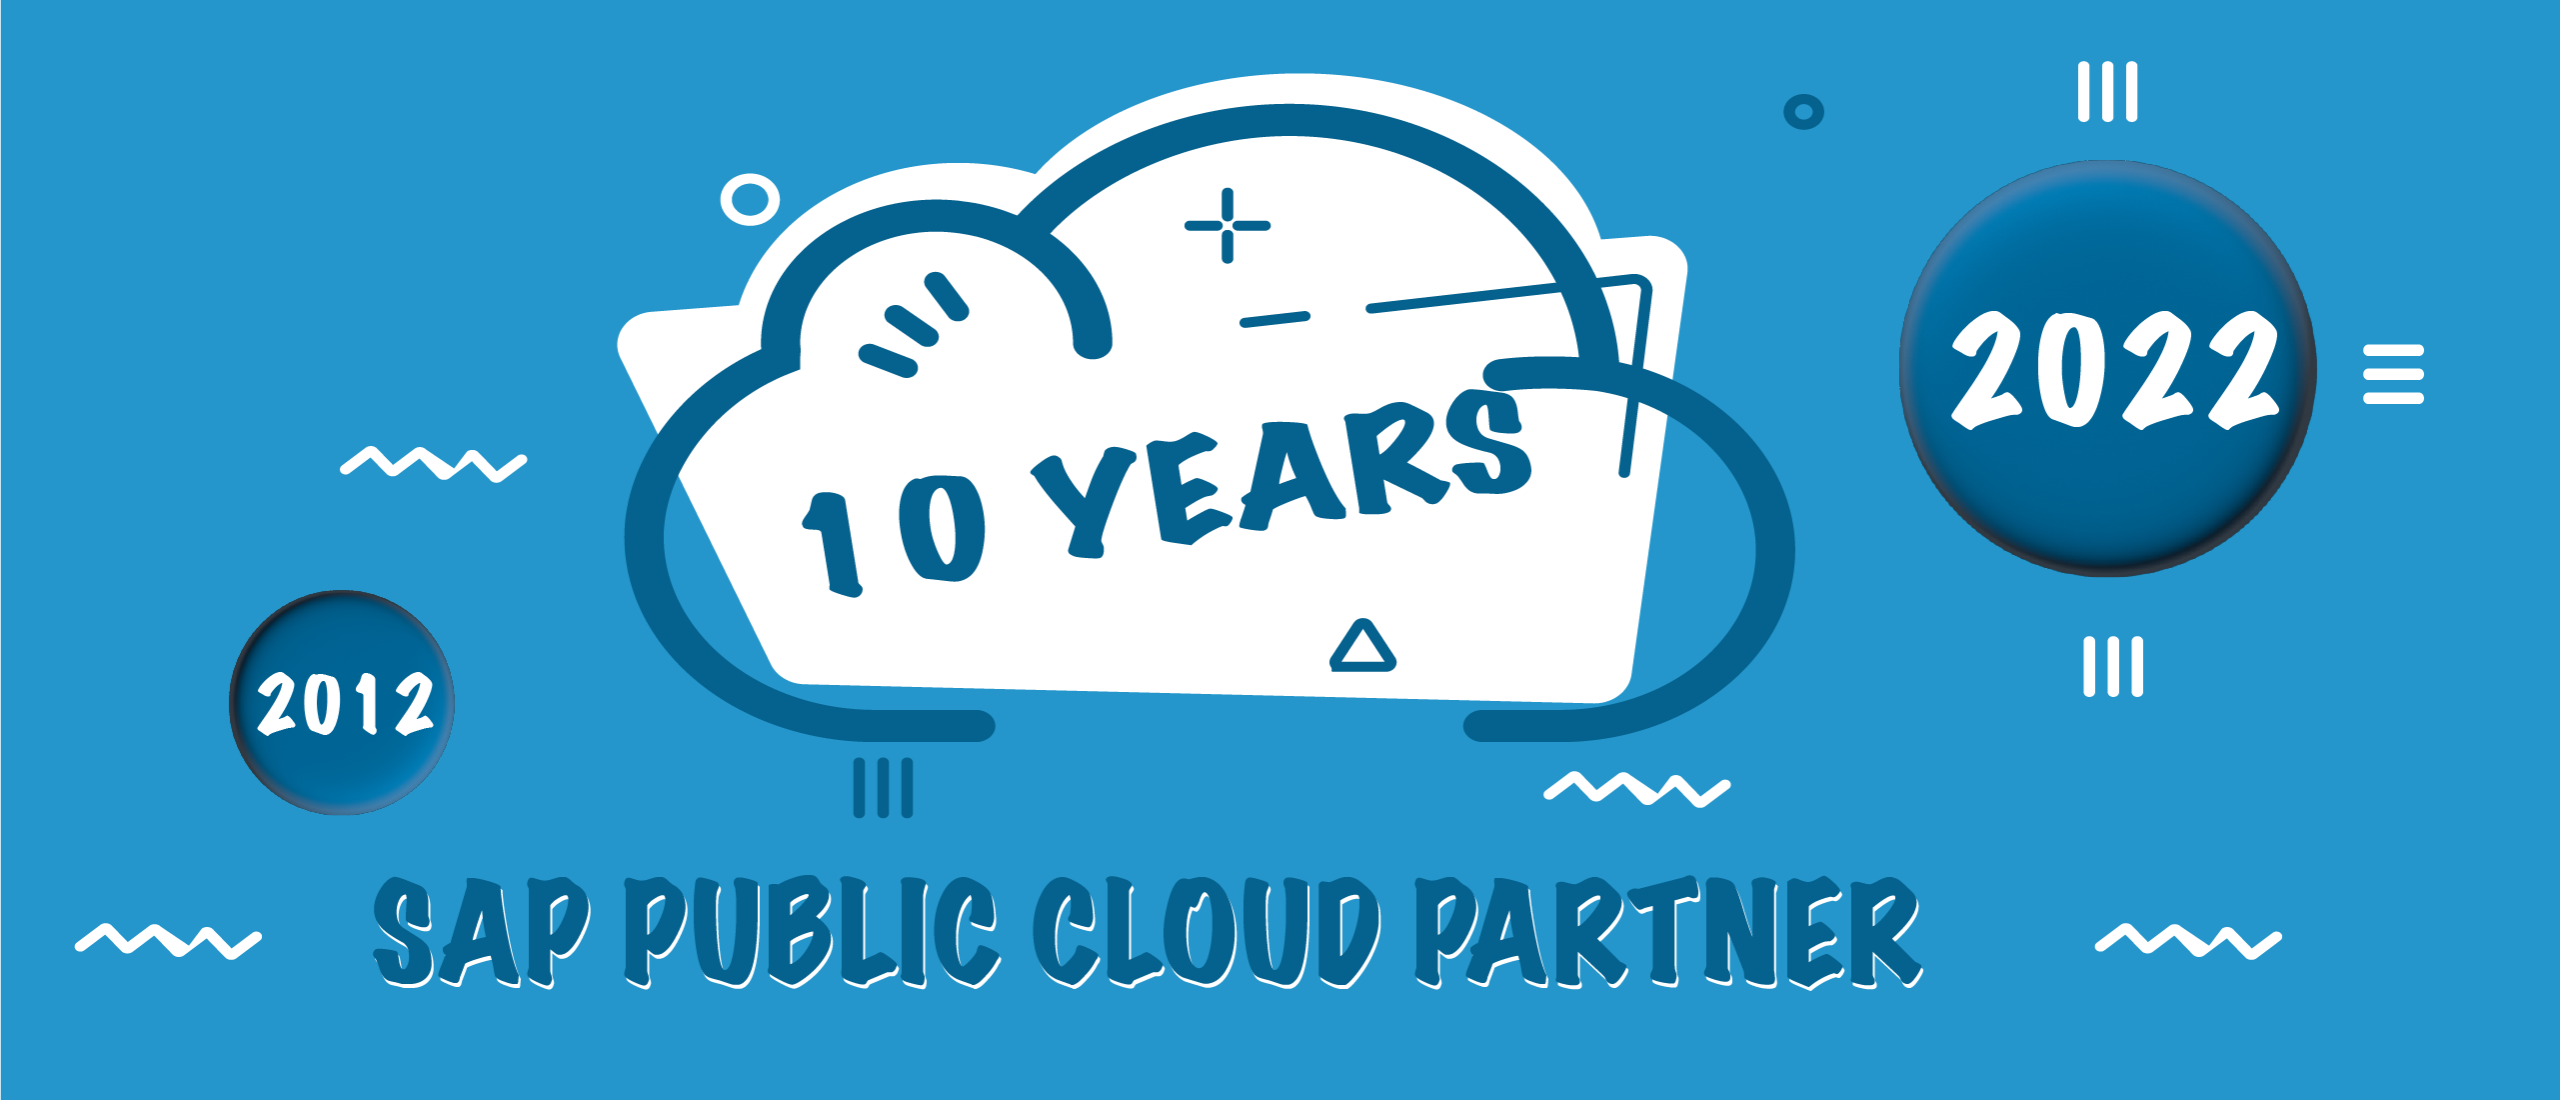 SAP Public Cloud - Early Adopter in 2012